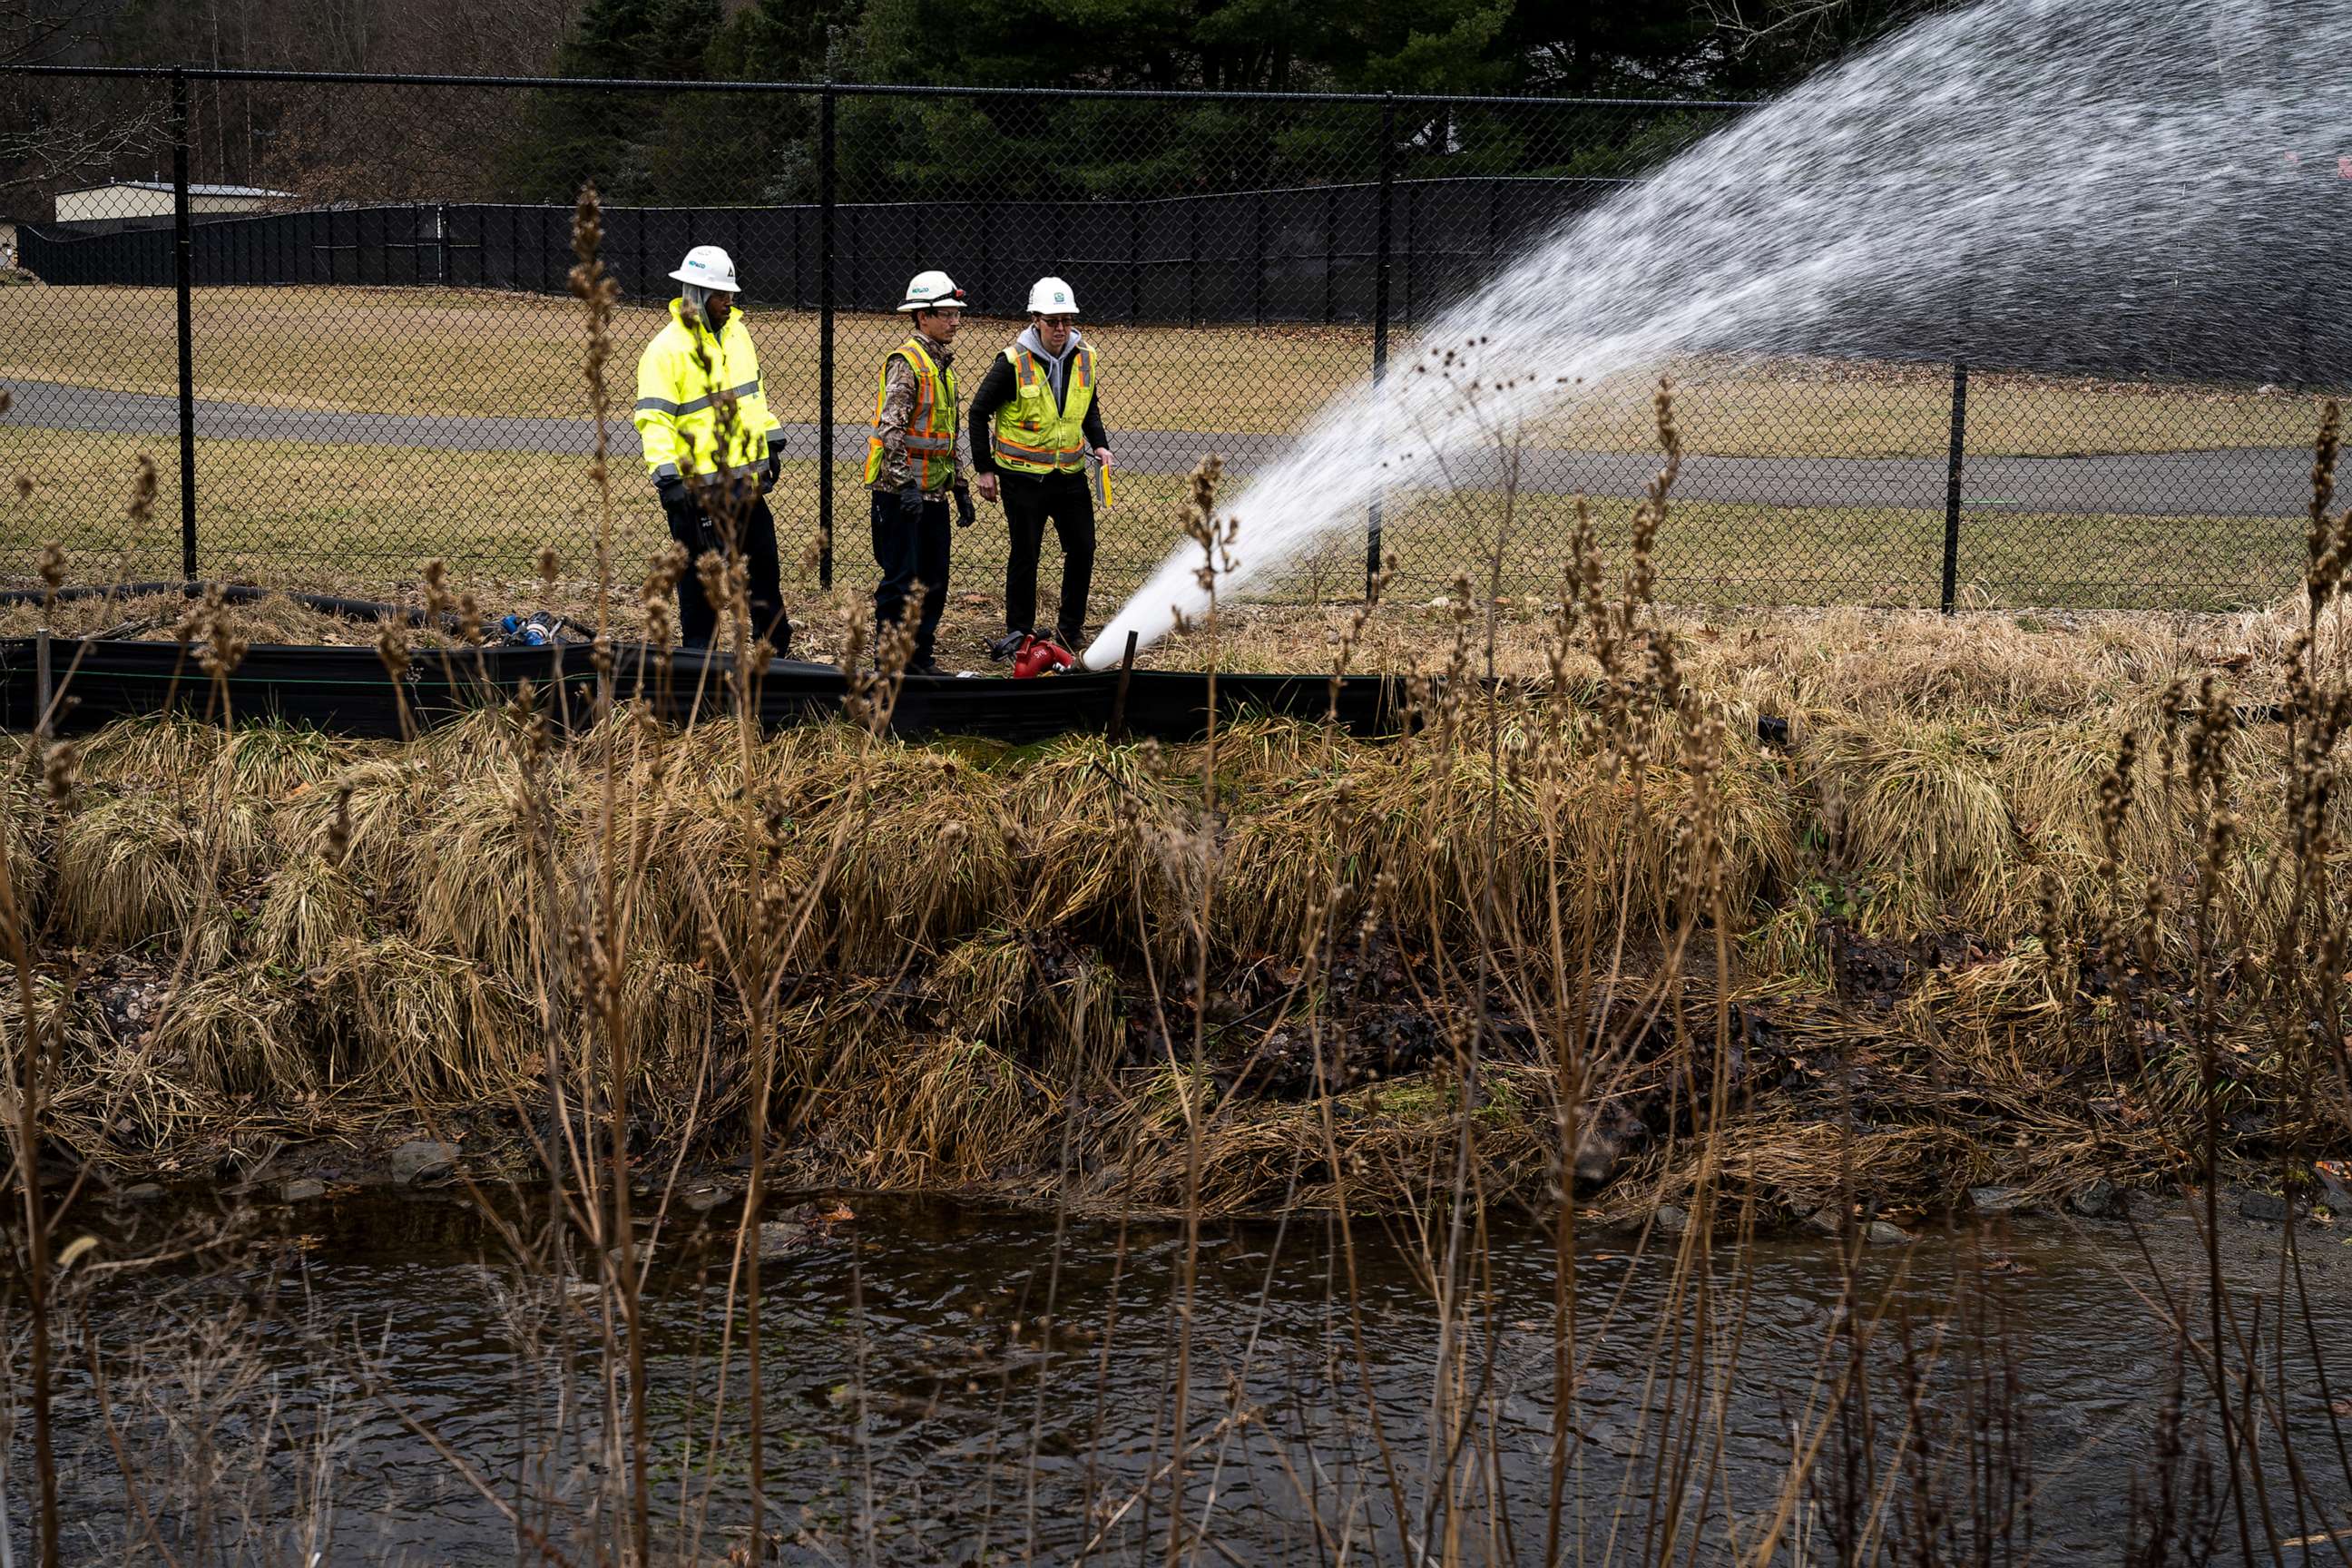 PHOTO: A clean-up crew works alongside a stream as clean-up efforts continue on Feb. 16, 2023, in East Palestine, Ohio. On Feb. 3rd, a Norfolk Southern Railways train carrying toxic chemicals derailed causing an environmental disaster.